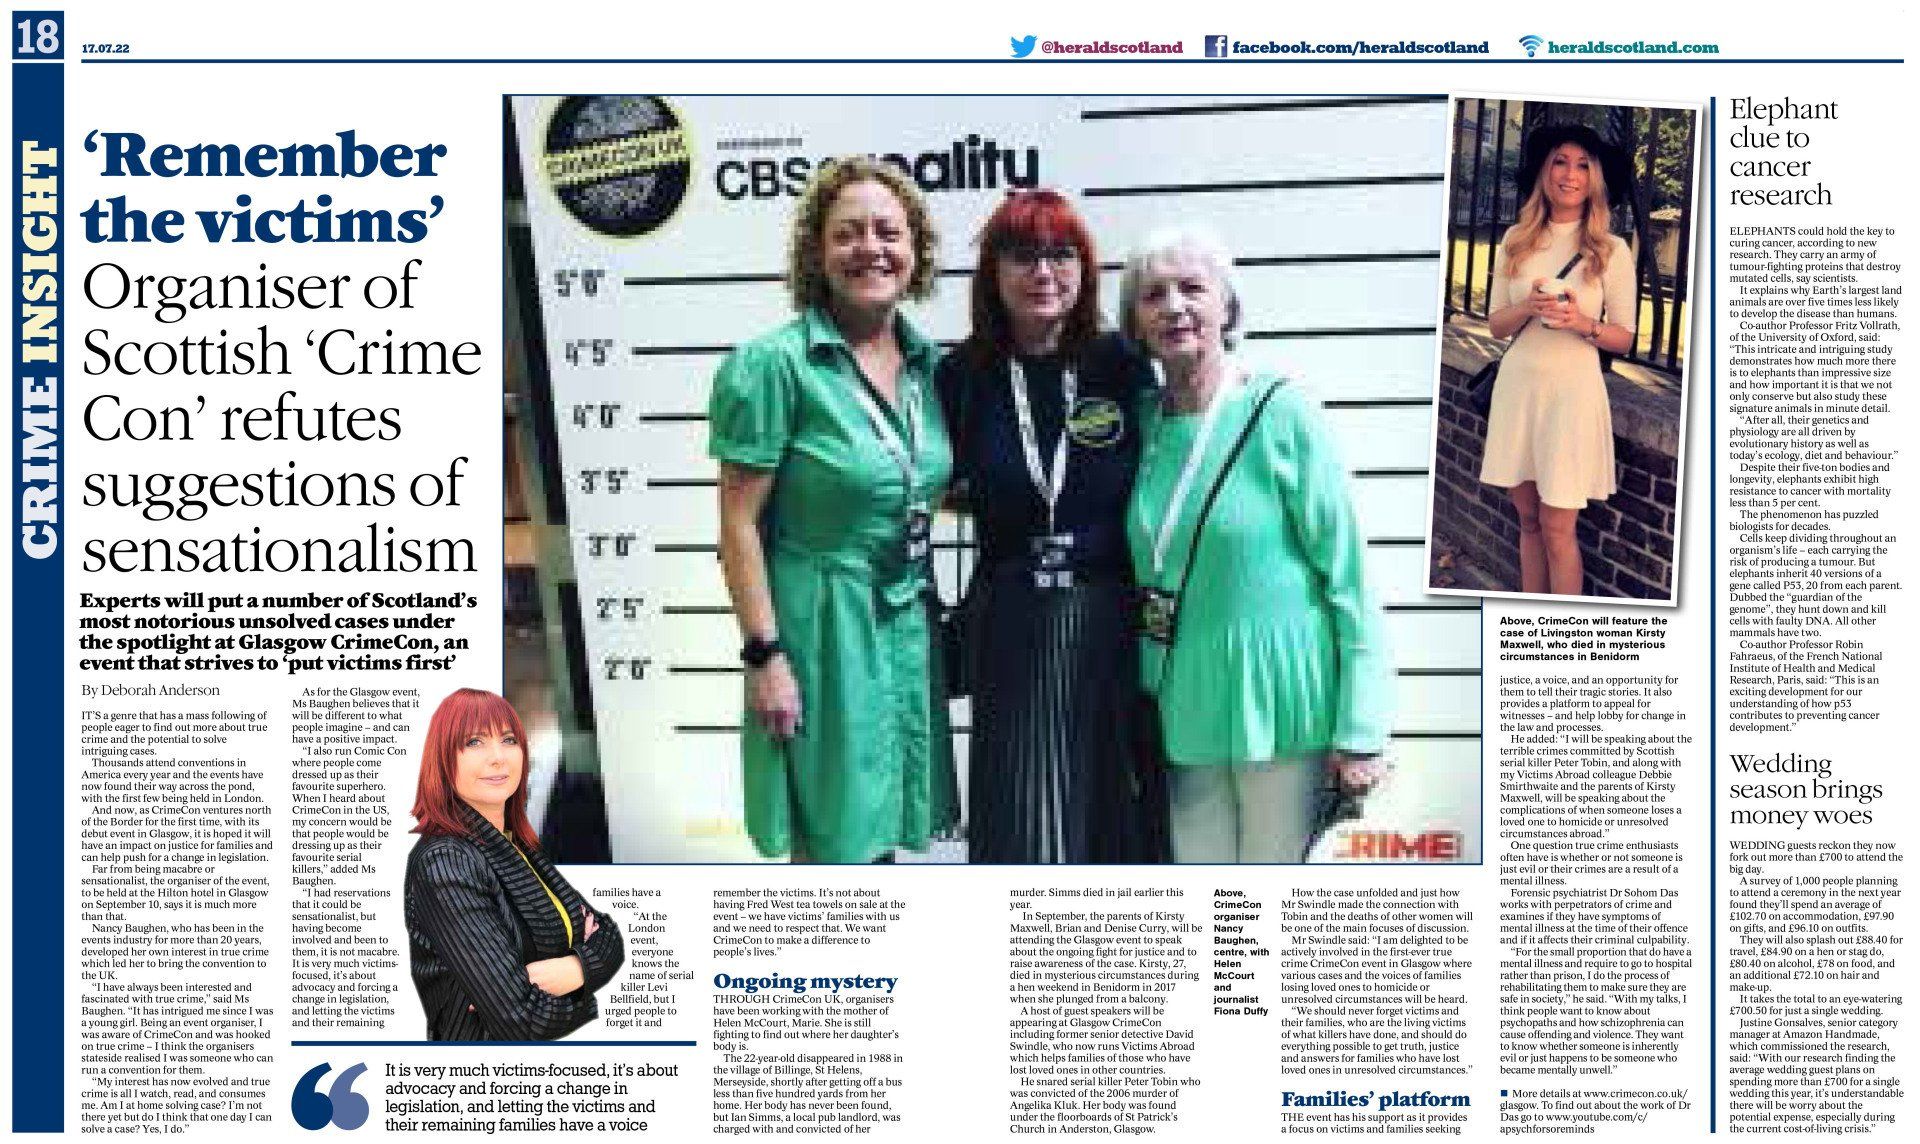 CrimeCon London, featured in the Herald